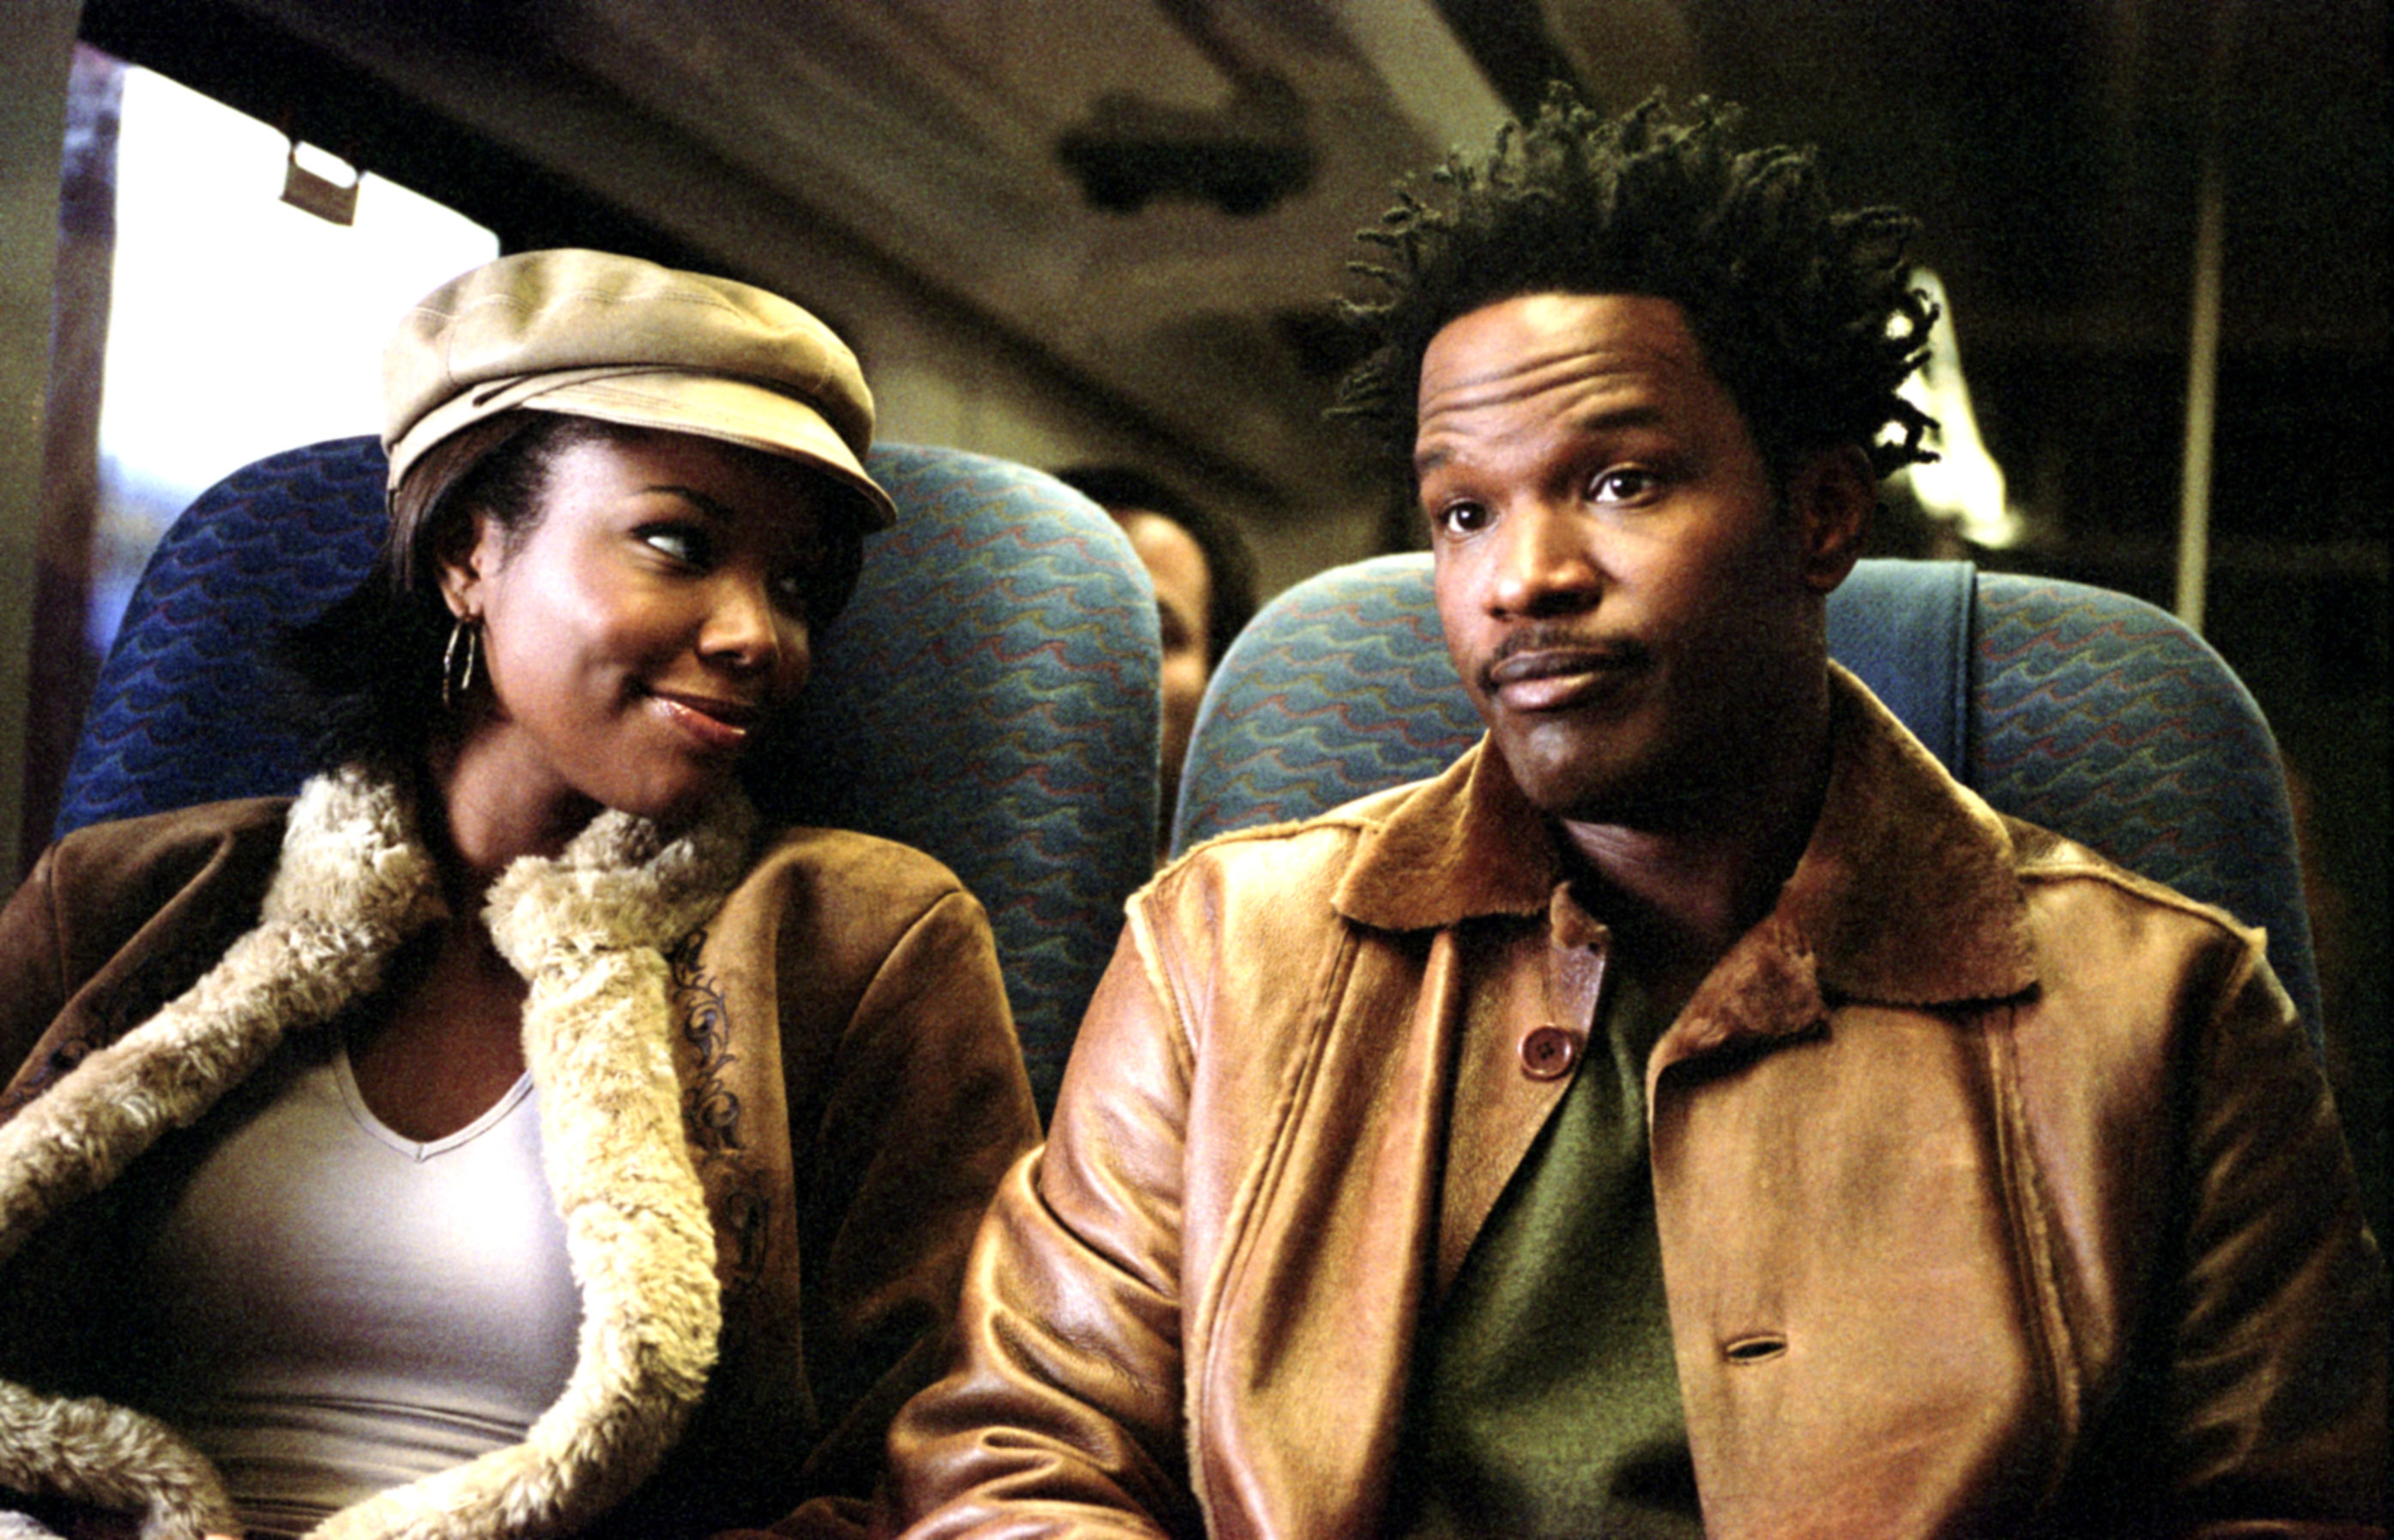 Gabrielle Union and Jamie Foxx sitting beside each other on a bus